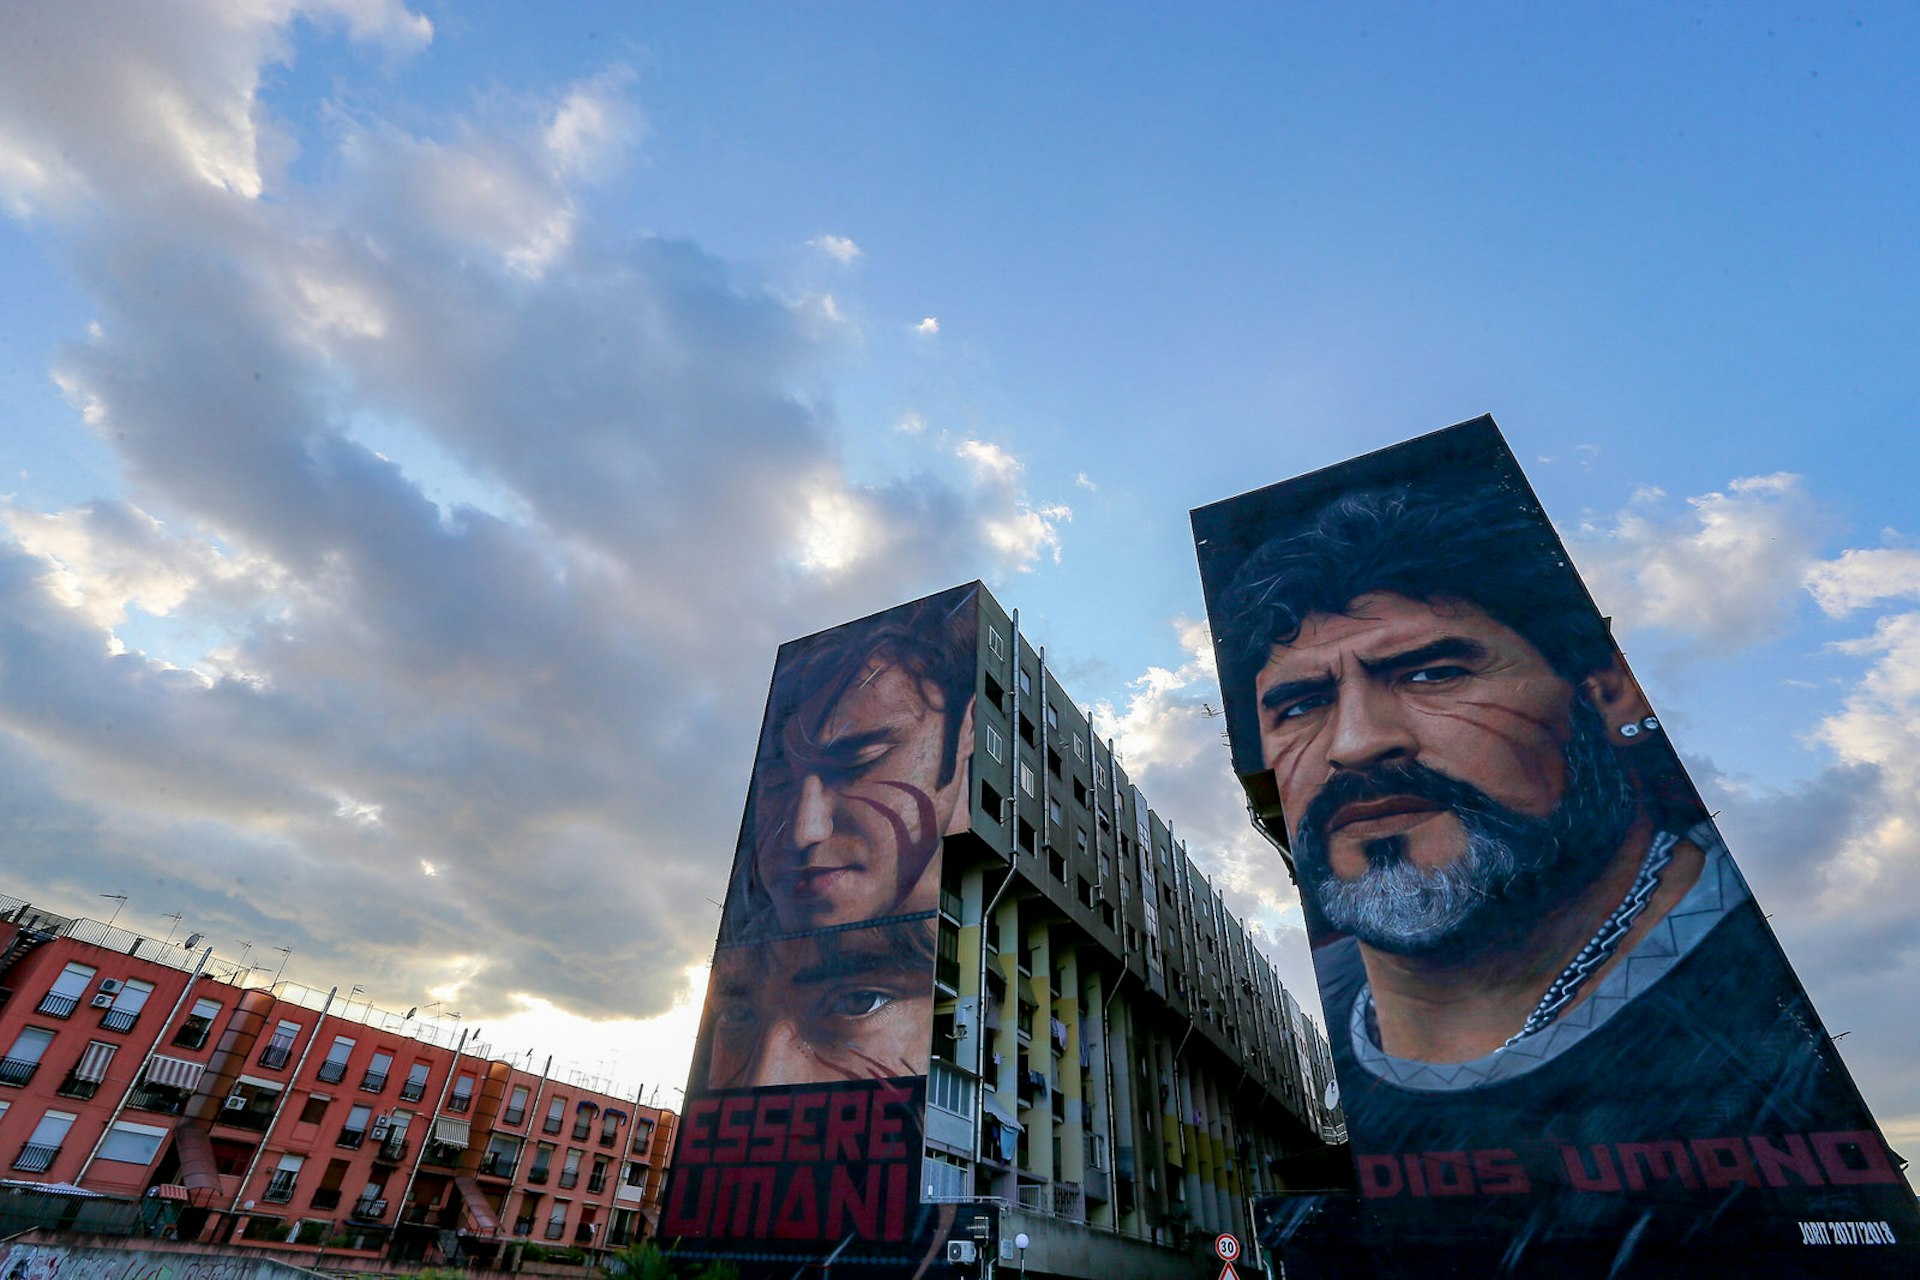 The side of an apartment building is decorated with two huge murals, one of the footballer Maradona's face and the other of a boy's face, both with red face paint on their cheeks